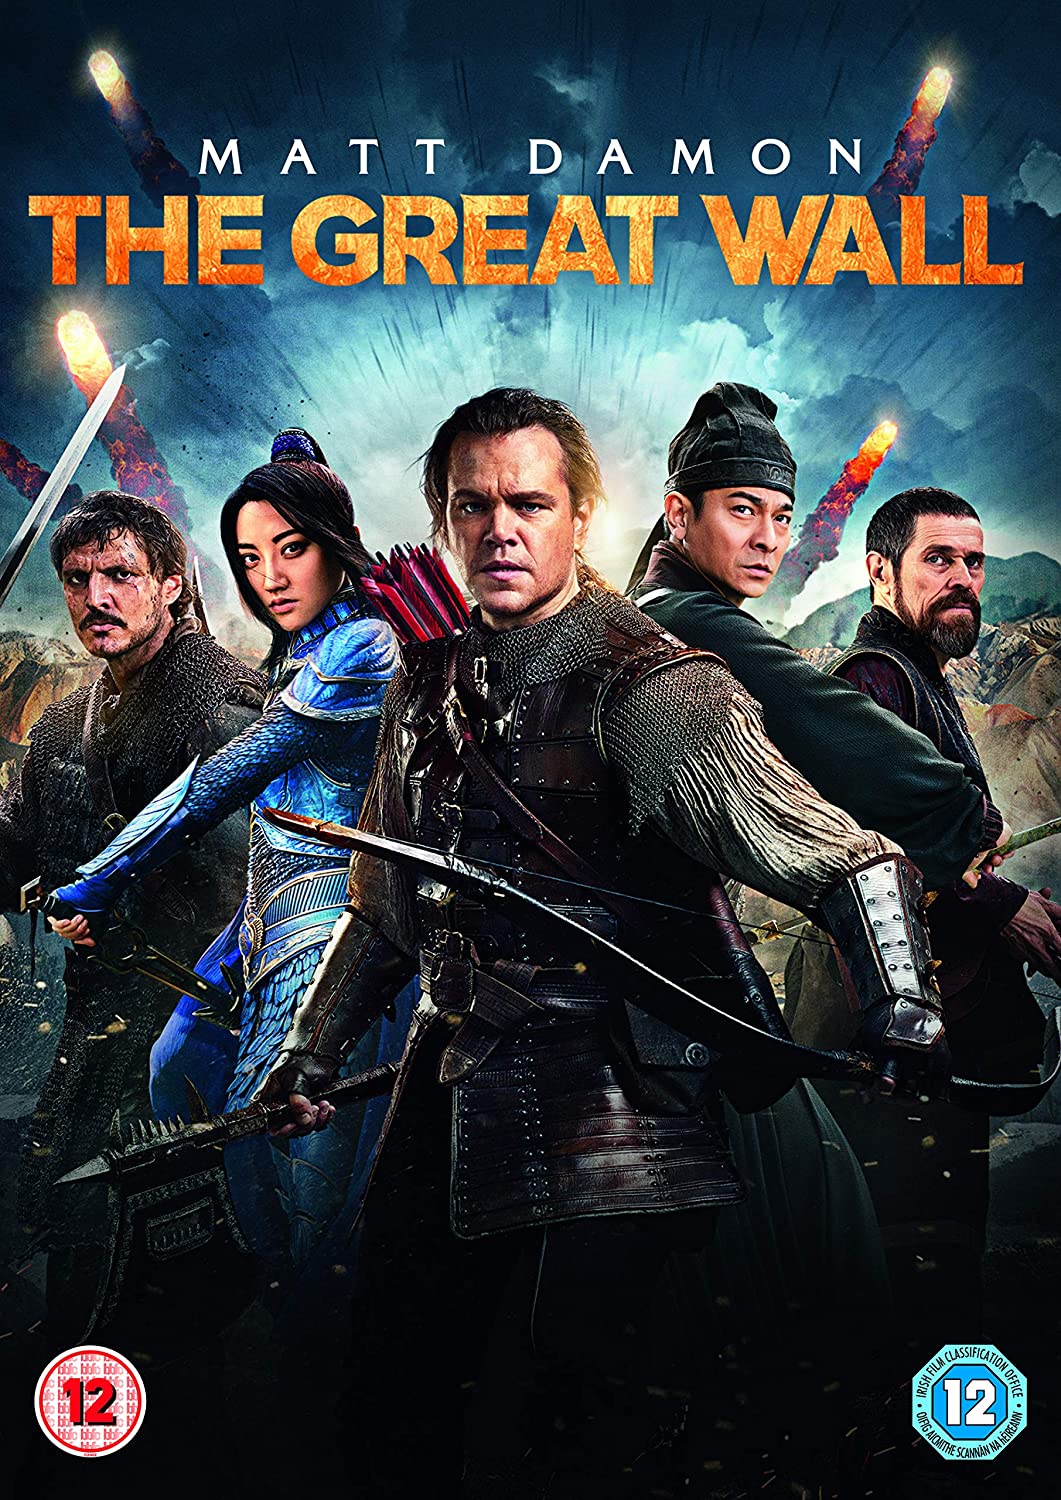 The Great Wall [2017] (DVD)